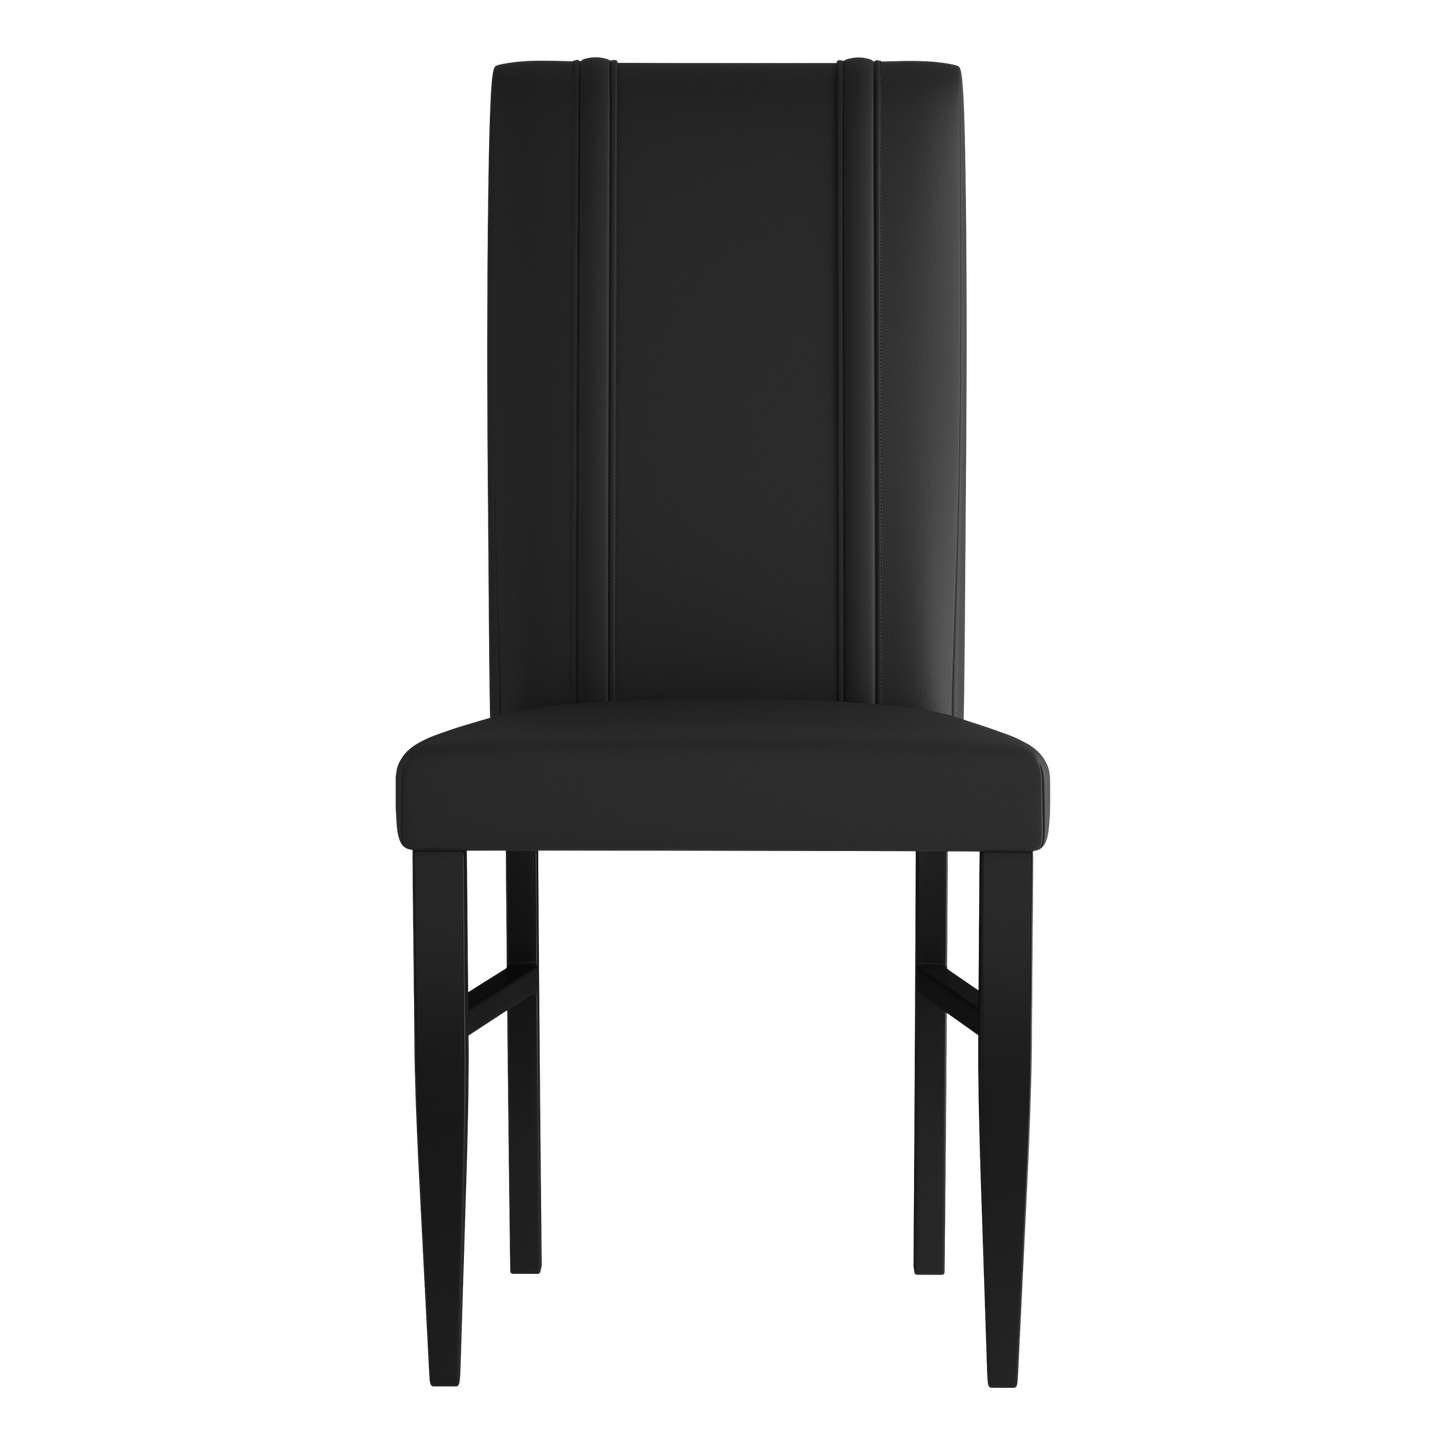 Side Chair 2000 with  Cincinnati Bengals Secondary Logo Set of 2